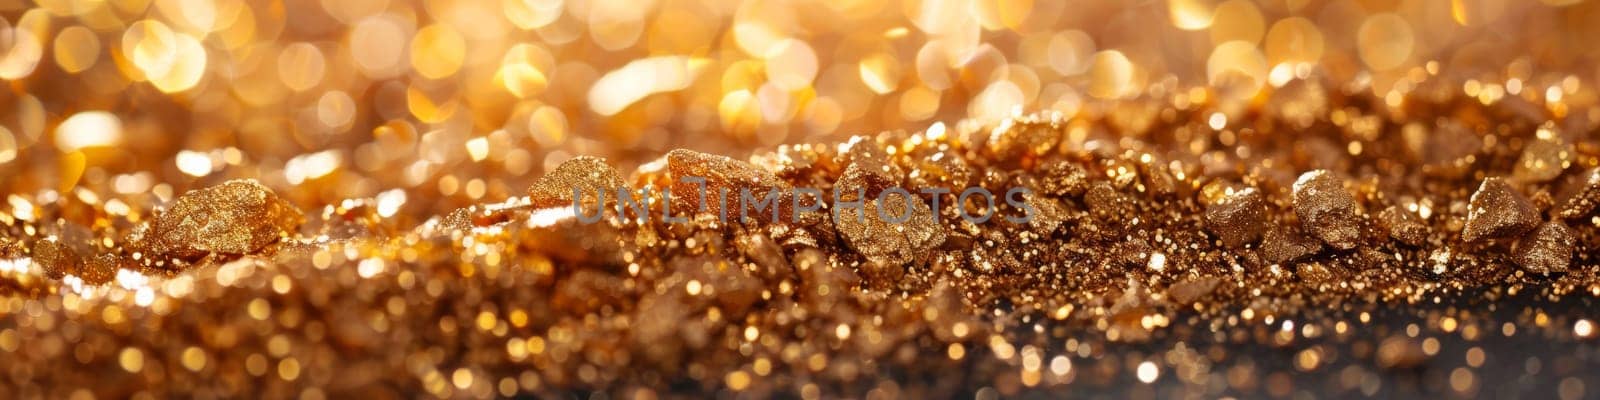 A close up of a pile of gold coins on top of some shiny surface